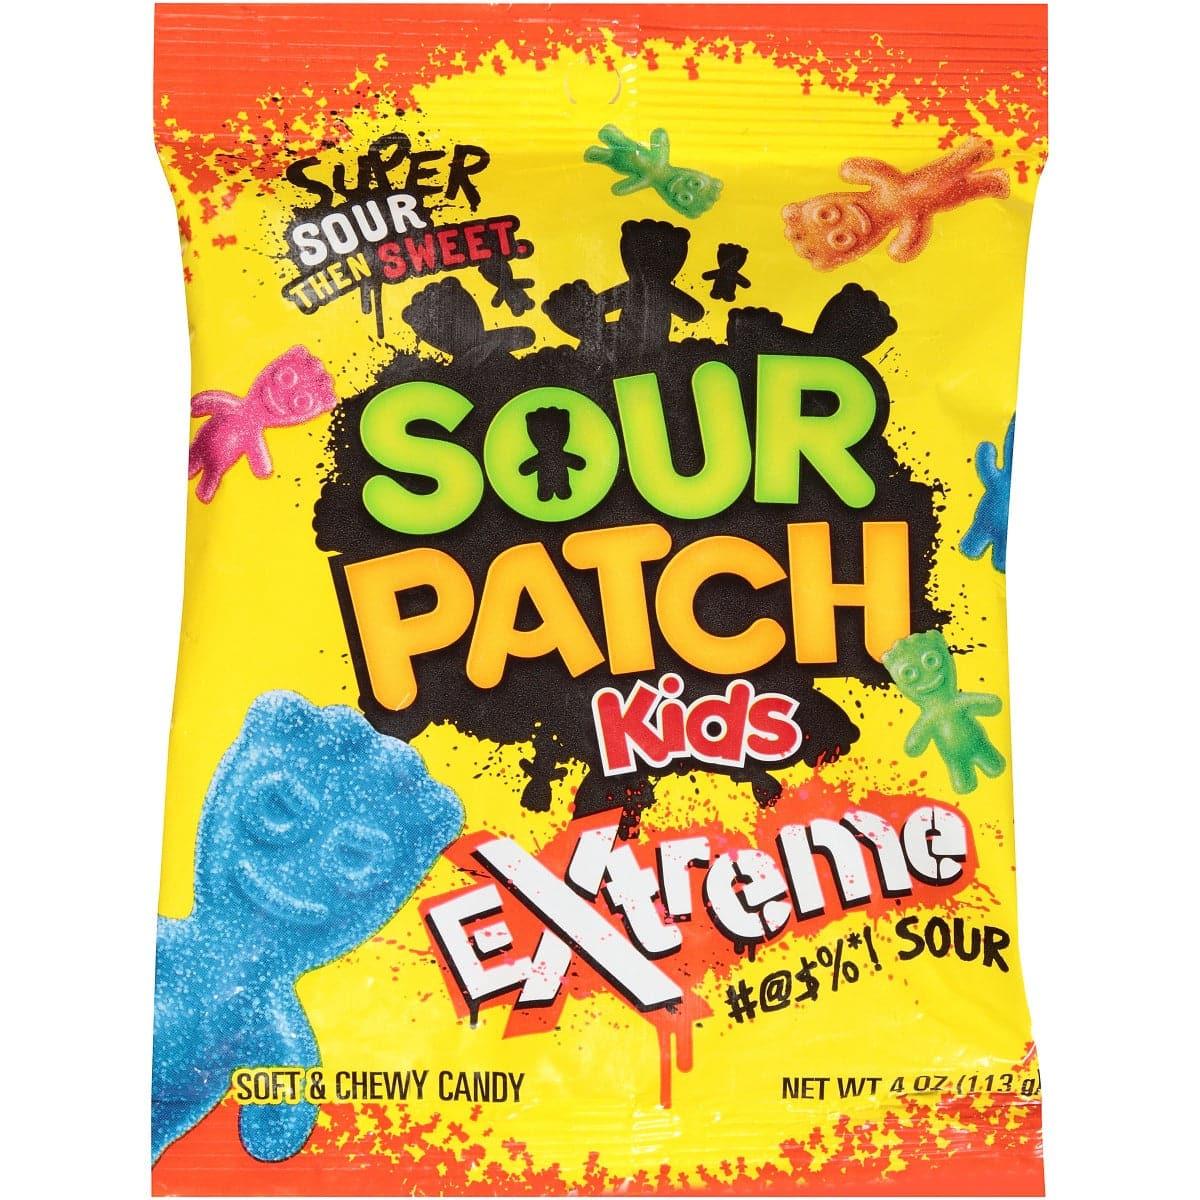 Sour Patch Kids Extreme Sour Soft & Chewy Candy 12 - 4 oz Bags